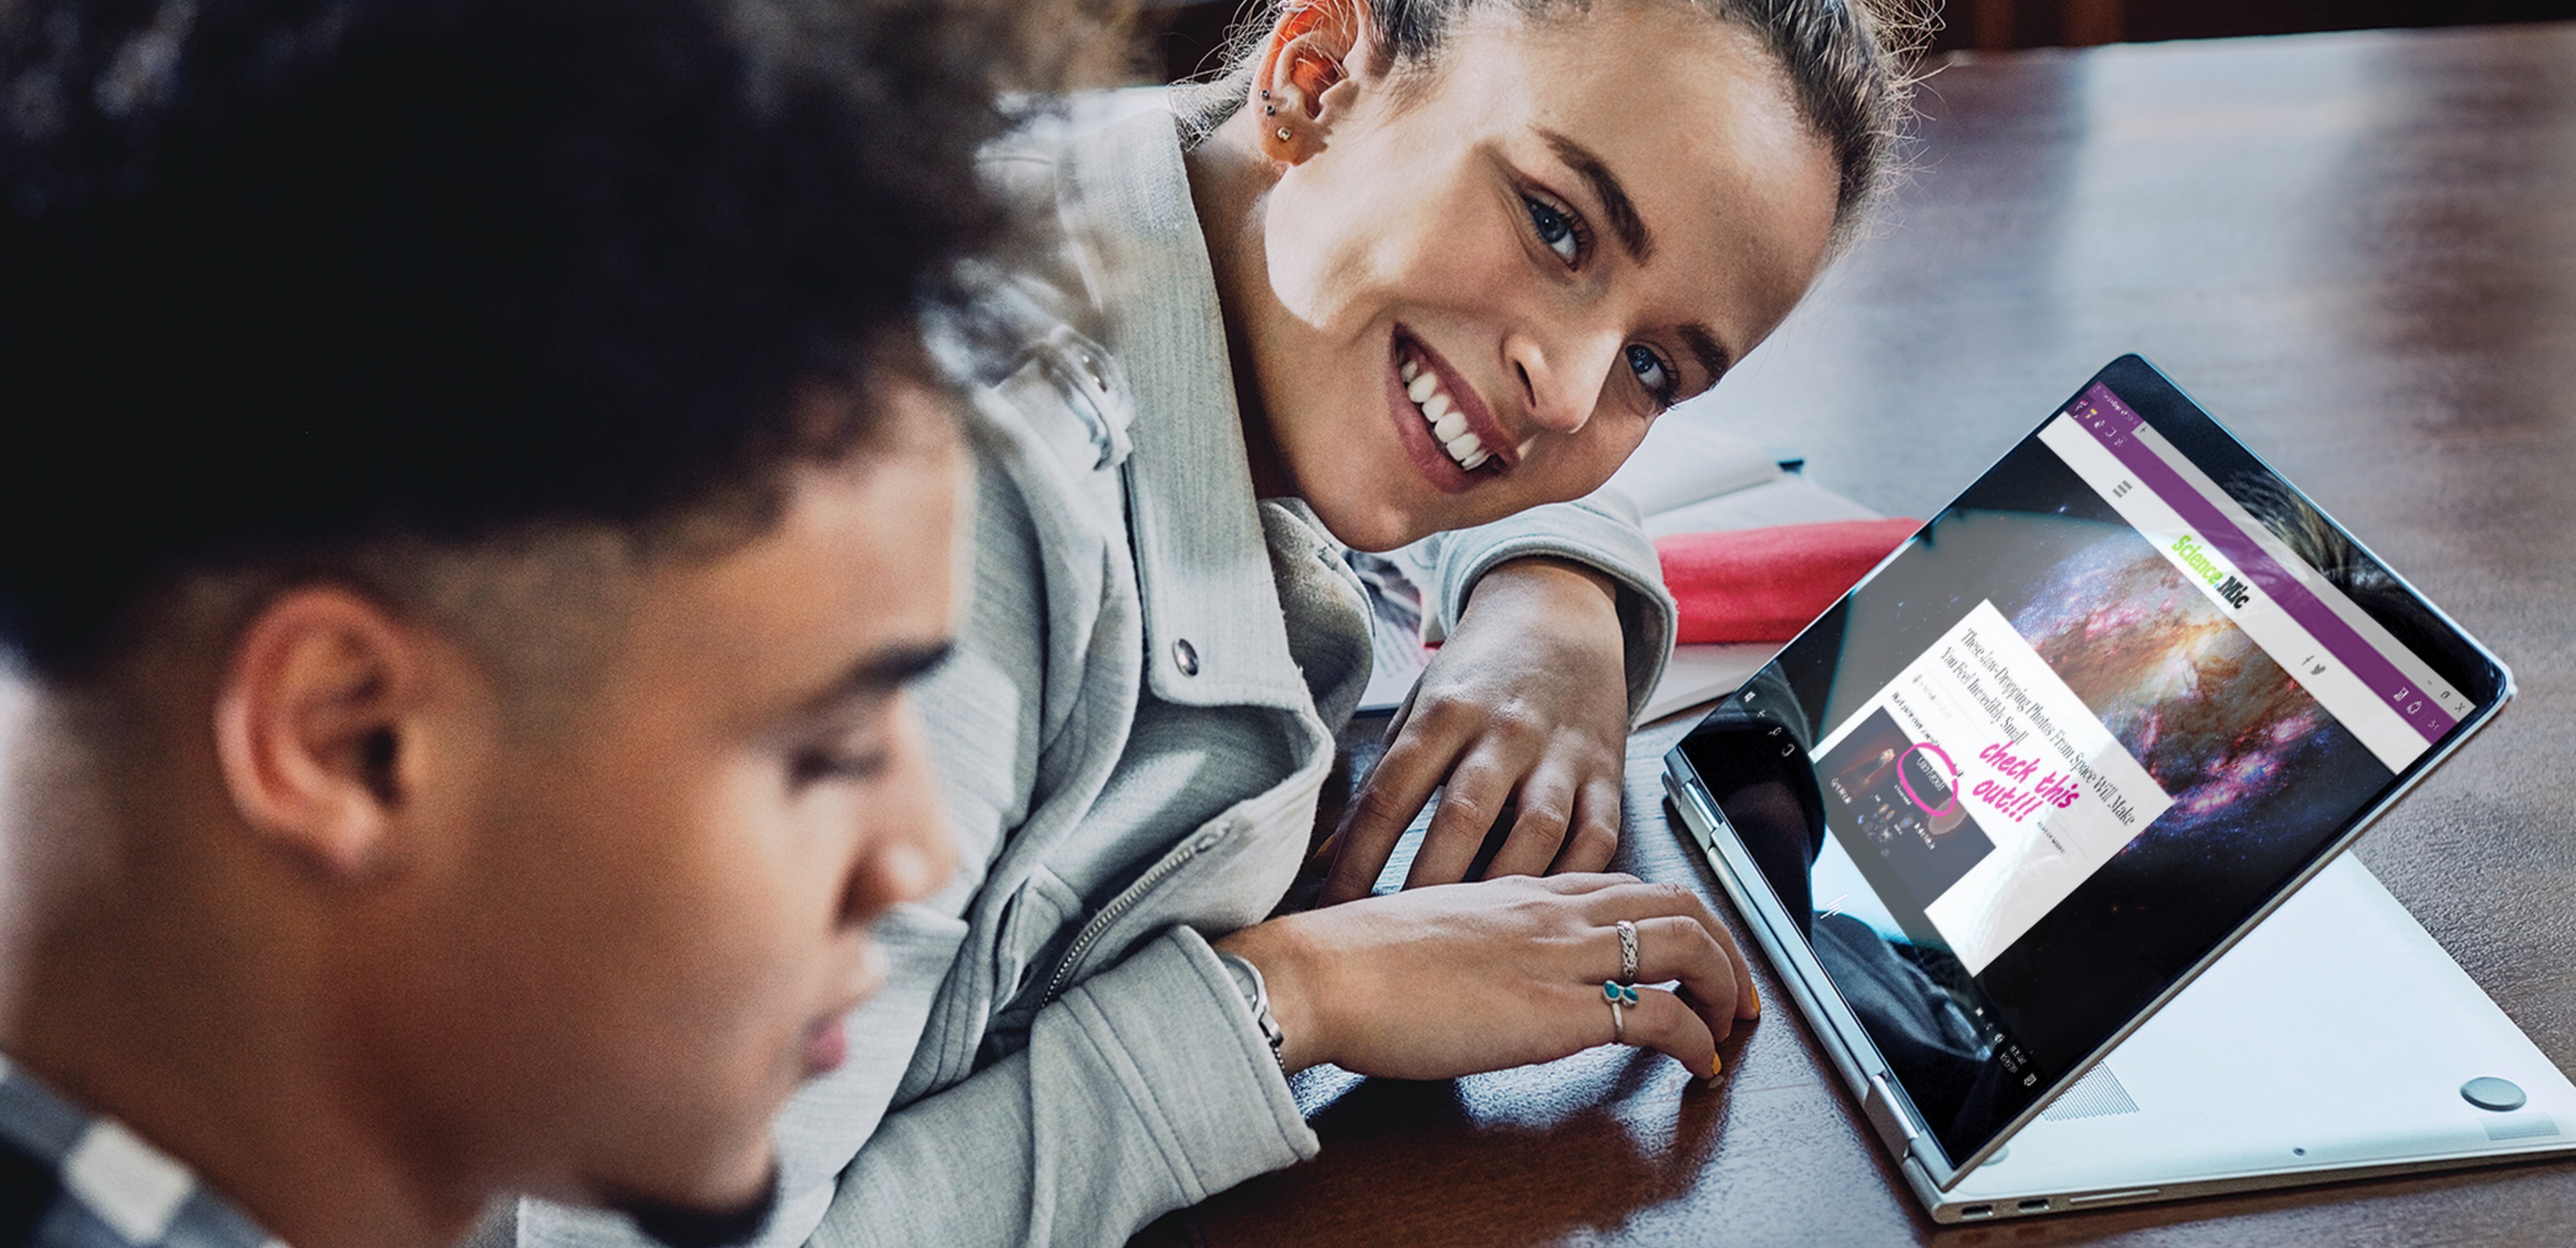 Man sitting next to a woman sitting at a desk smiling at the camera with an HP Windows 10 laptop in front of her where Windows Ink is being shown on the screen.